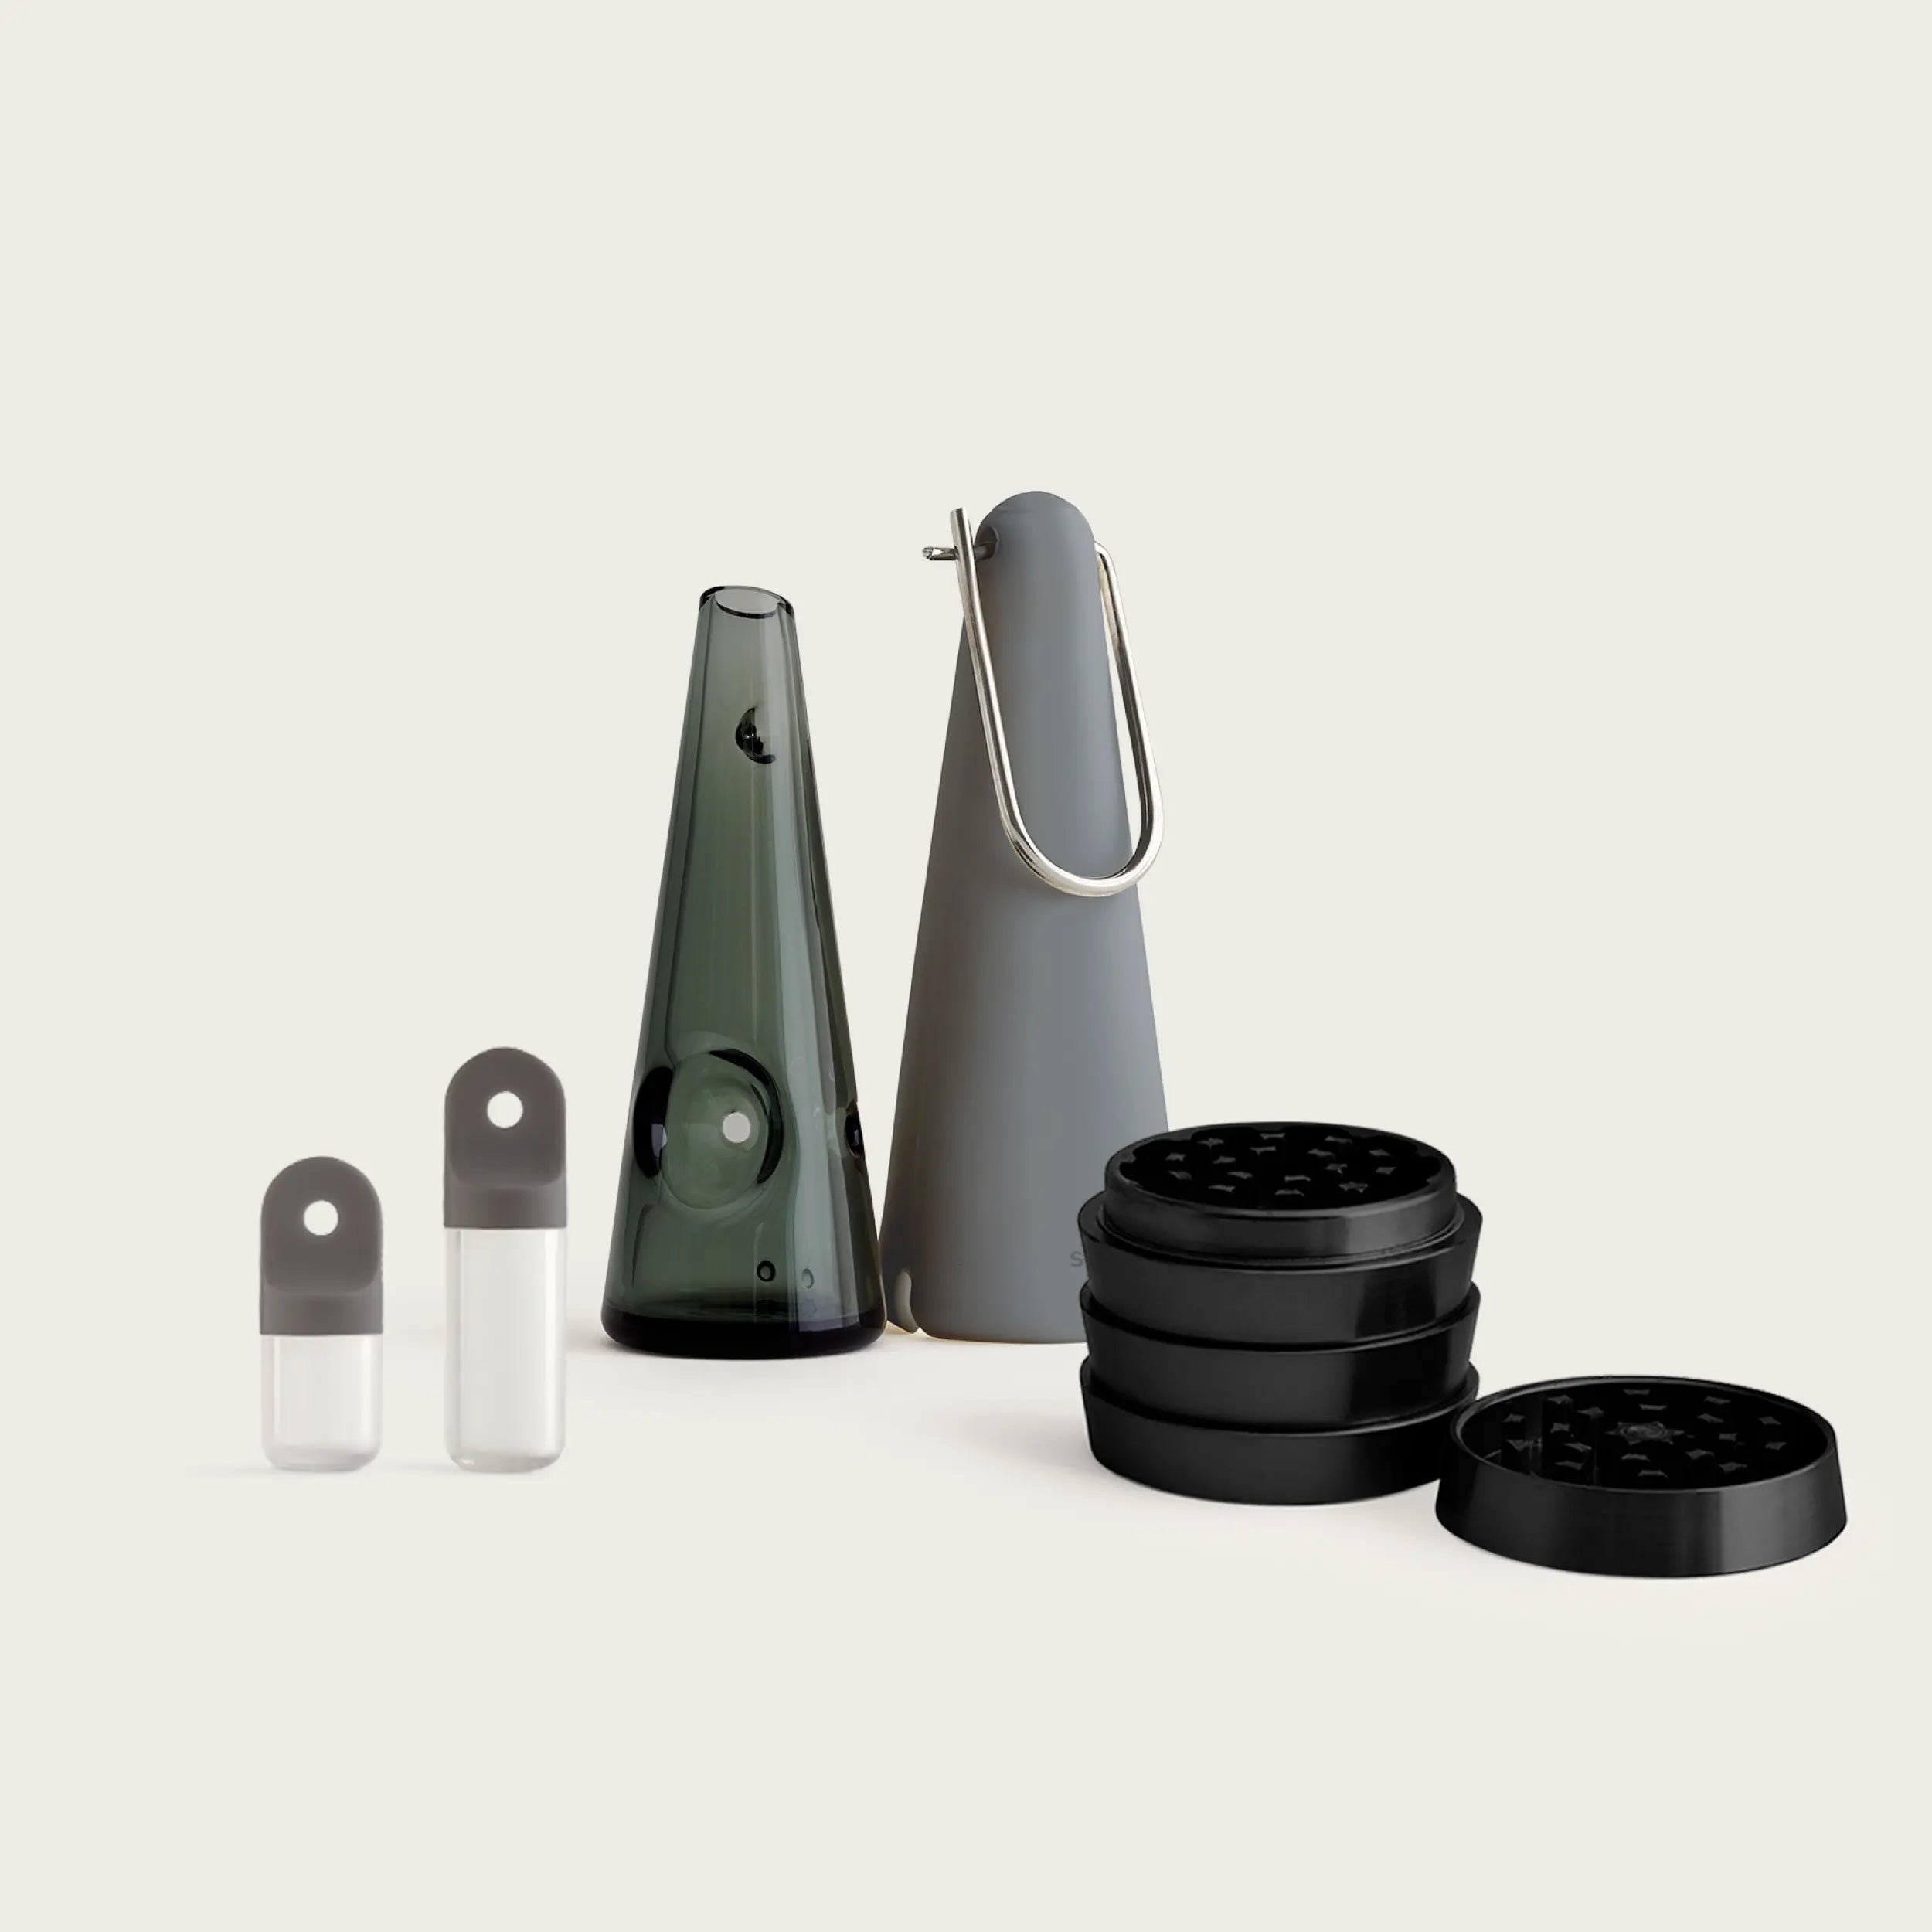 premium on-the-go travel kit, high quality borosilicate glass pipe with silicone carry sleeve, airtight premium ashtray and portable stash pods.